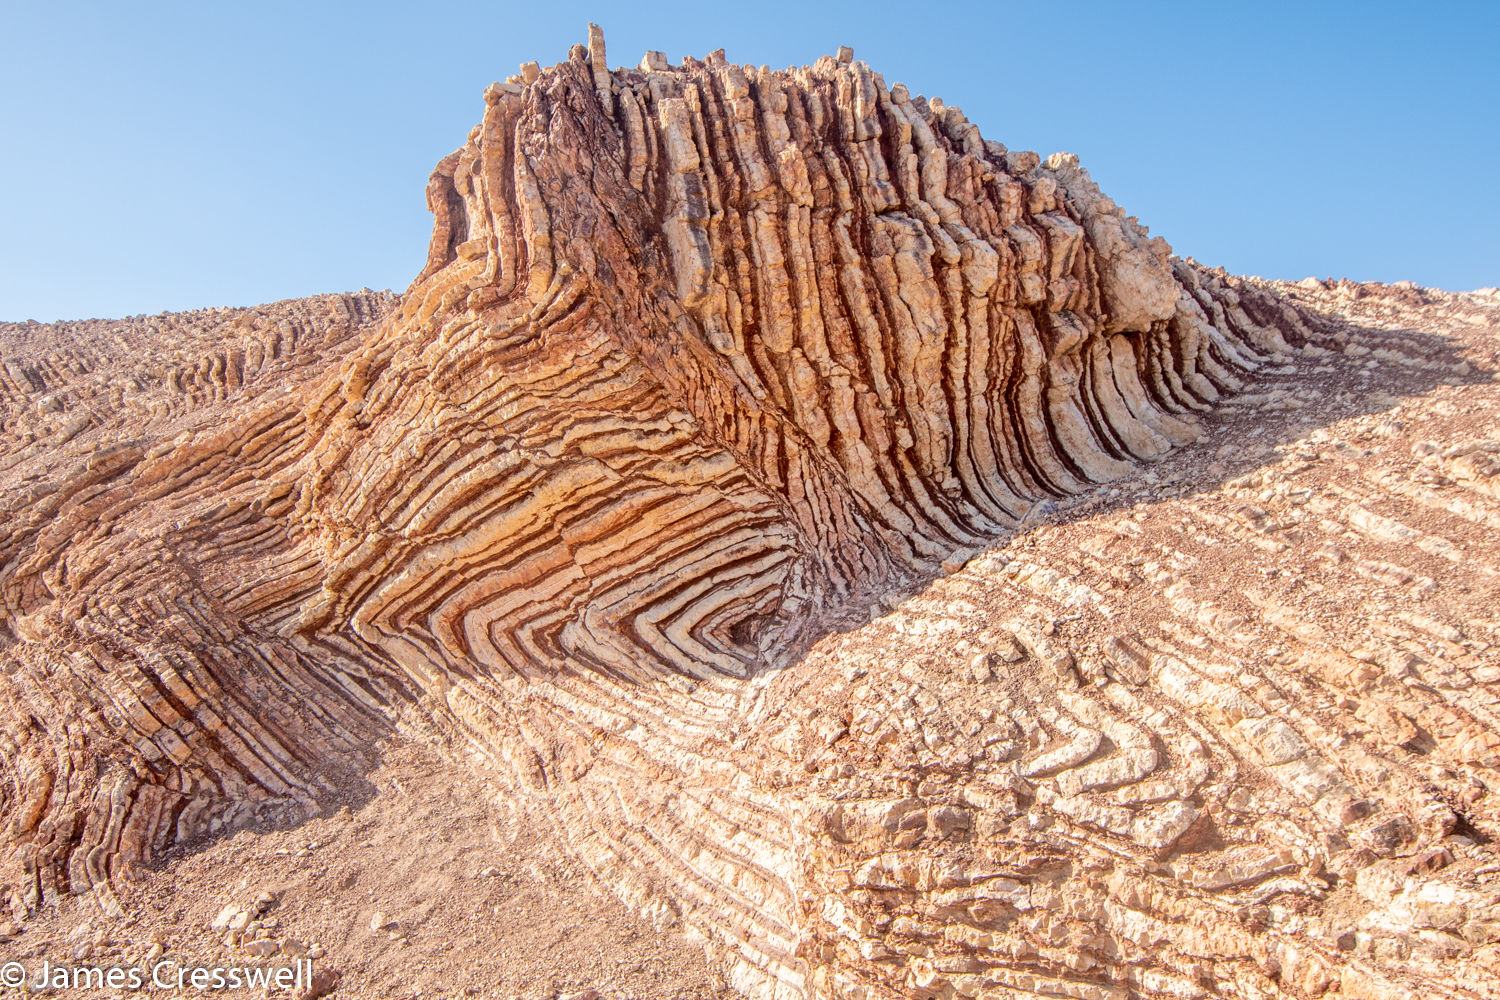 A photograph of the Mother of all Outcrops taken on a GeoWorld Travel Oman geology trip, tour and holiday